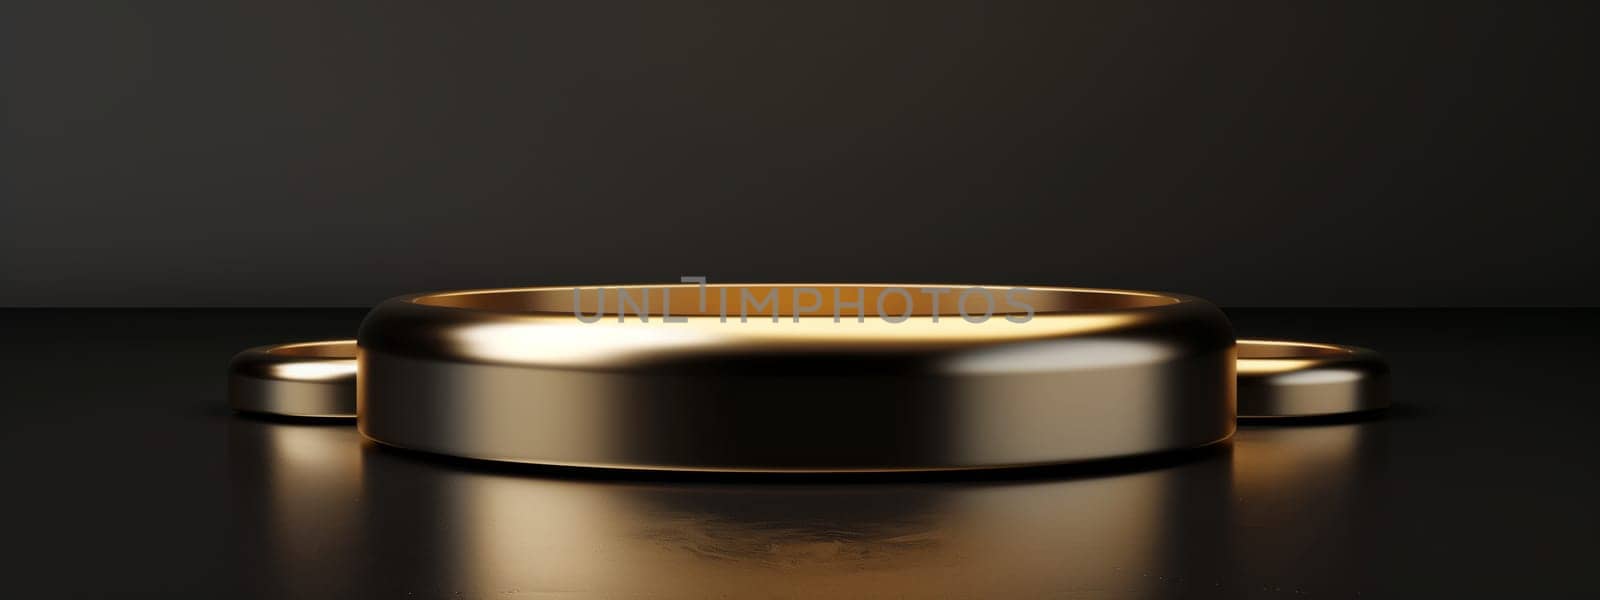 A communication device rests on a black surface beside a gold ring by richwolf